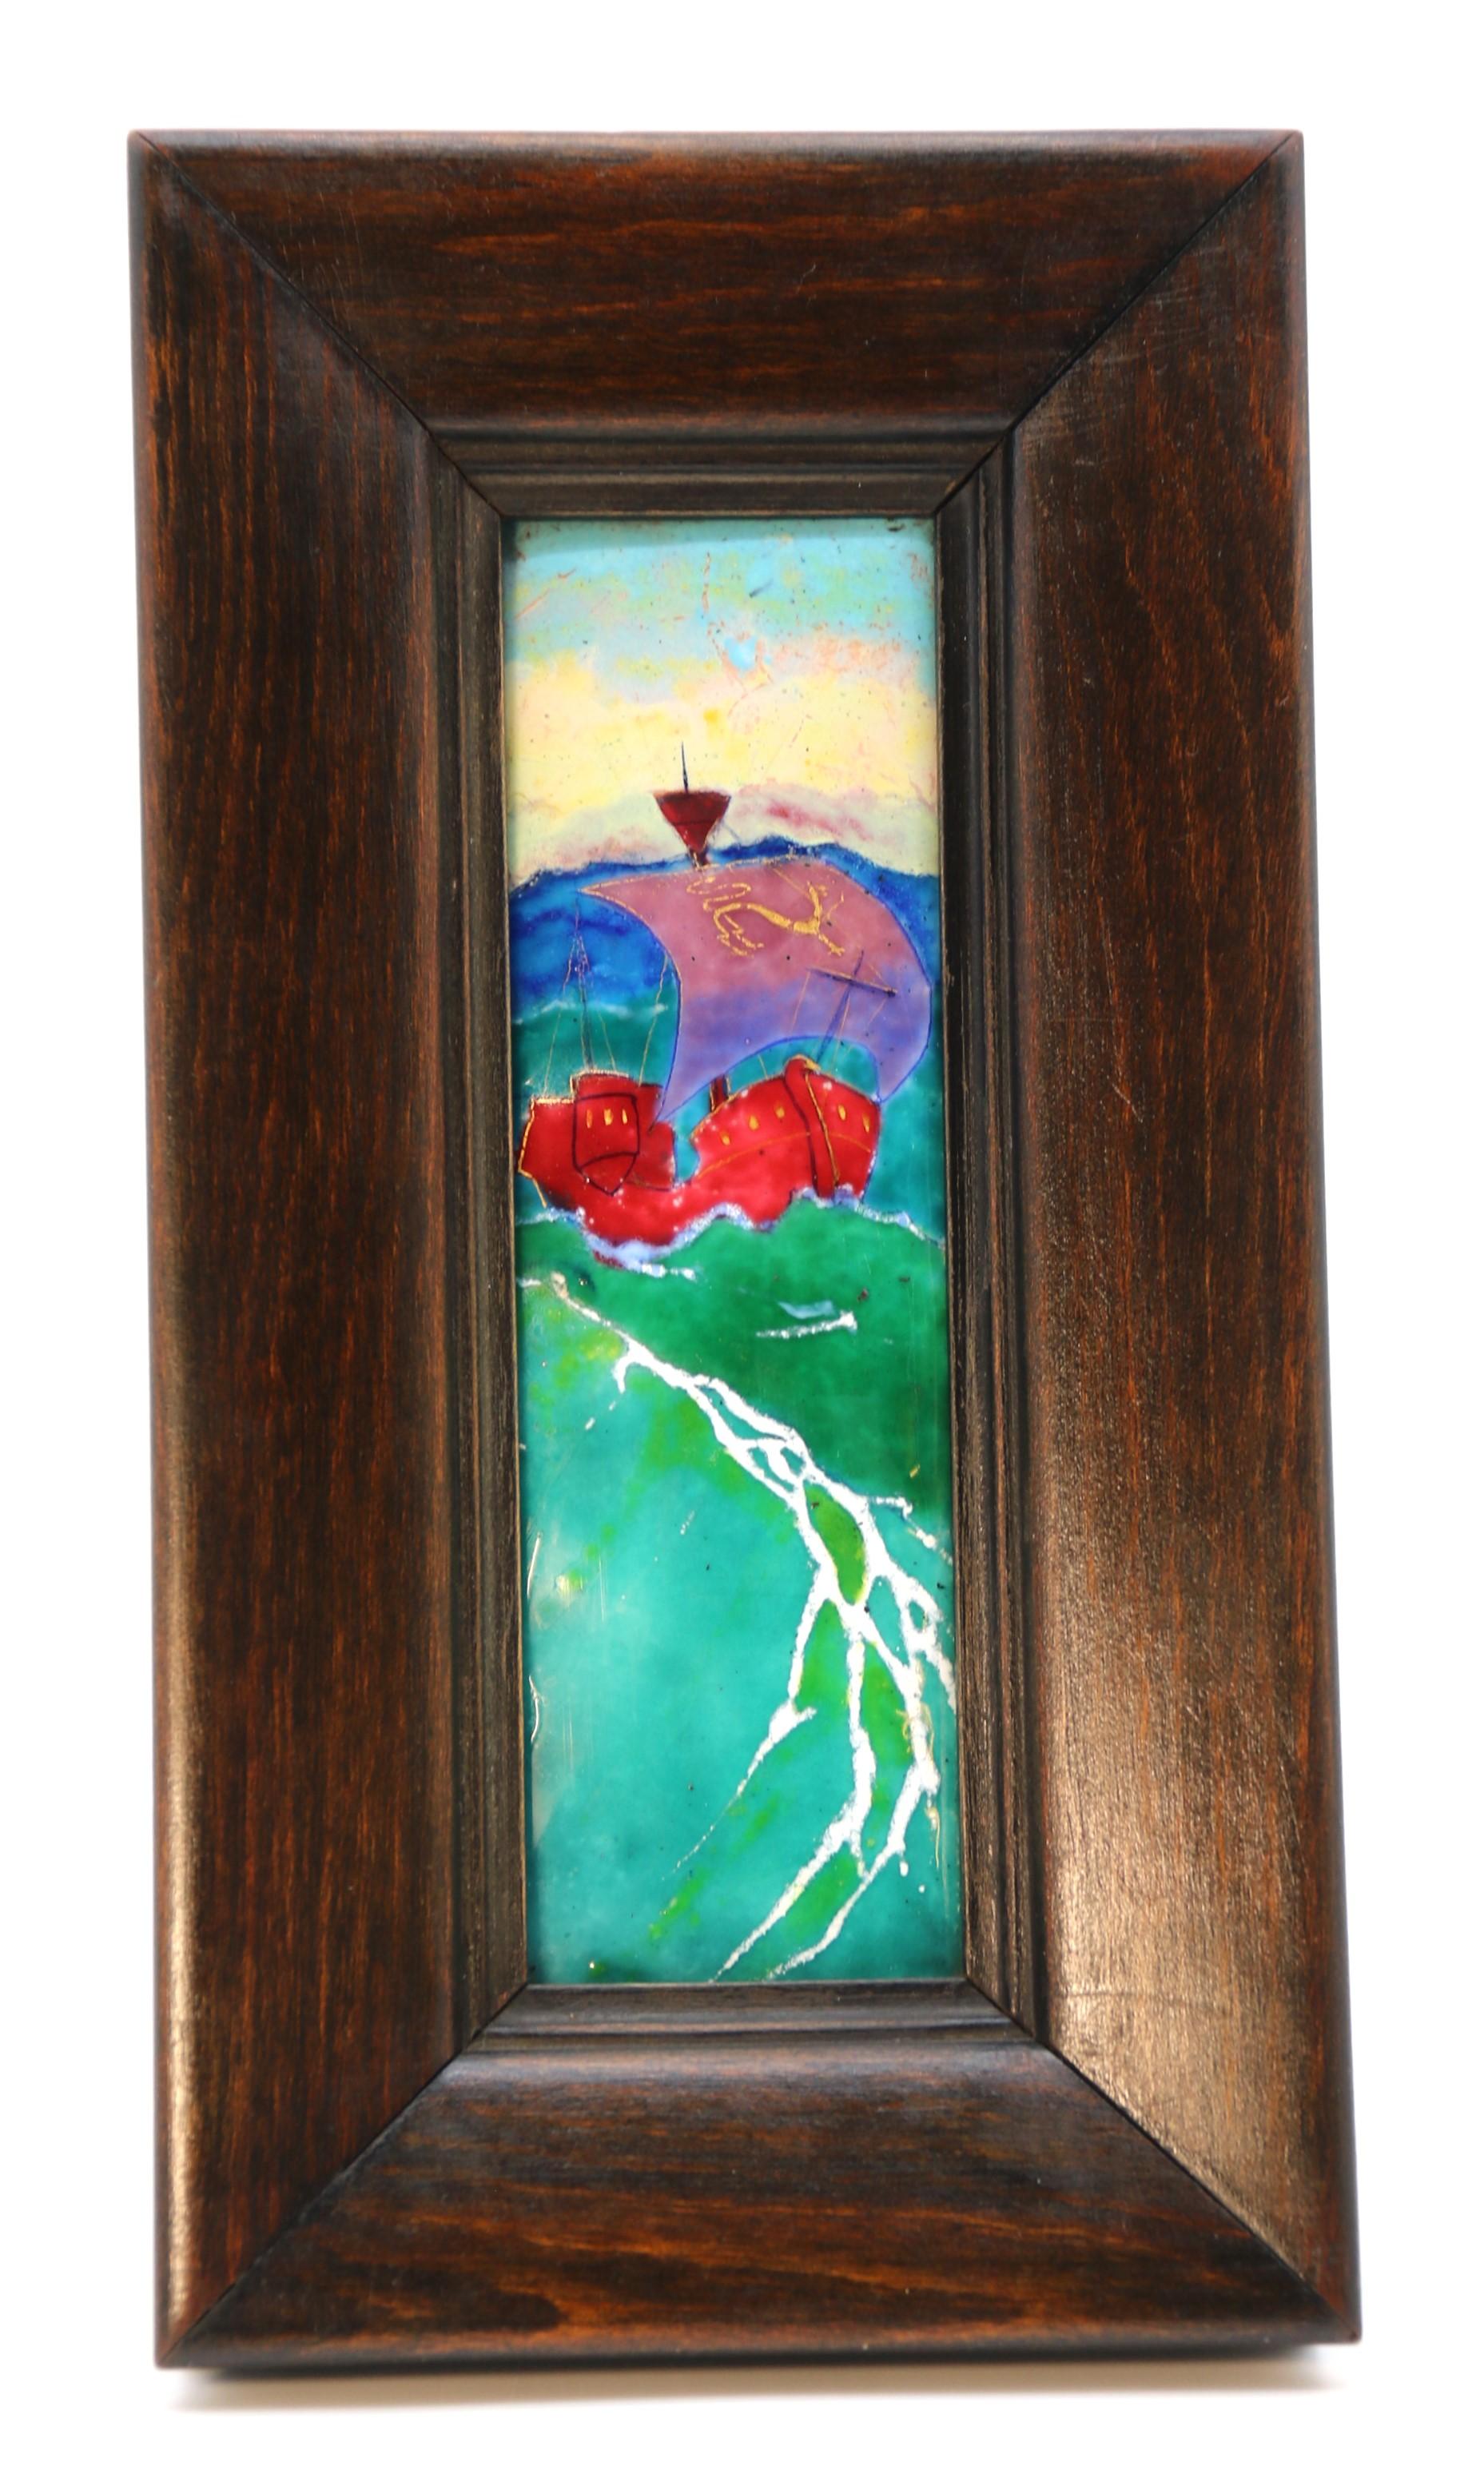 This superb and vibrantly coloured Limoges plaque is beautifully enamelled onto a convex surface with a Viking ship at full sail in a choppy sea. This stylish piece of wall art is decorated and hand painted in high fired glass enamel onto a copper